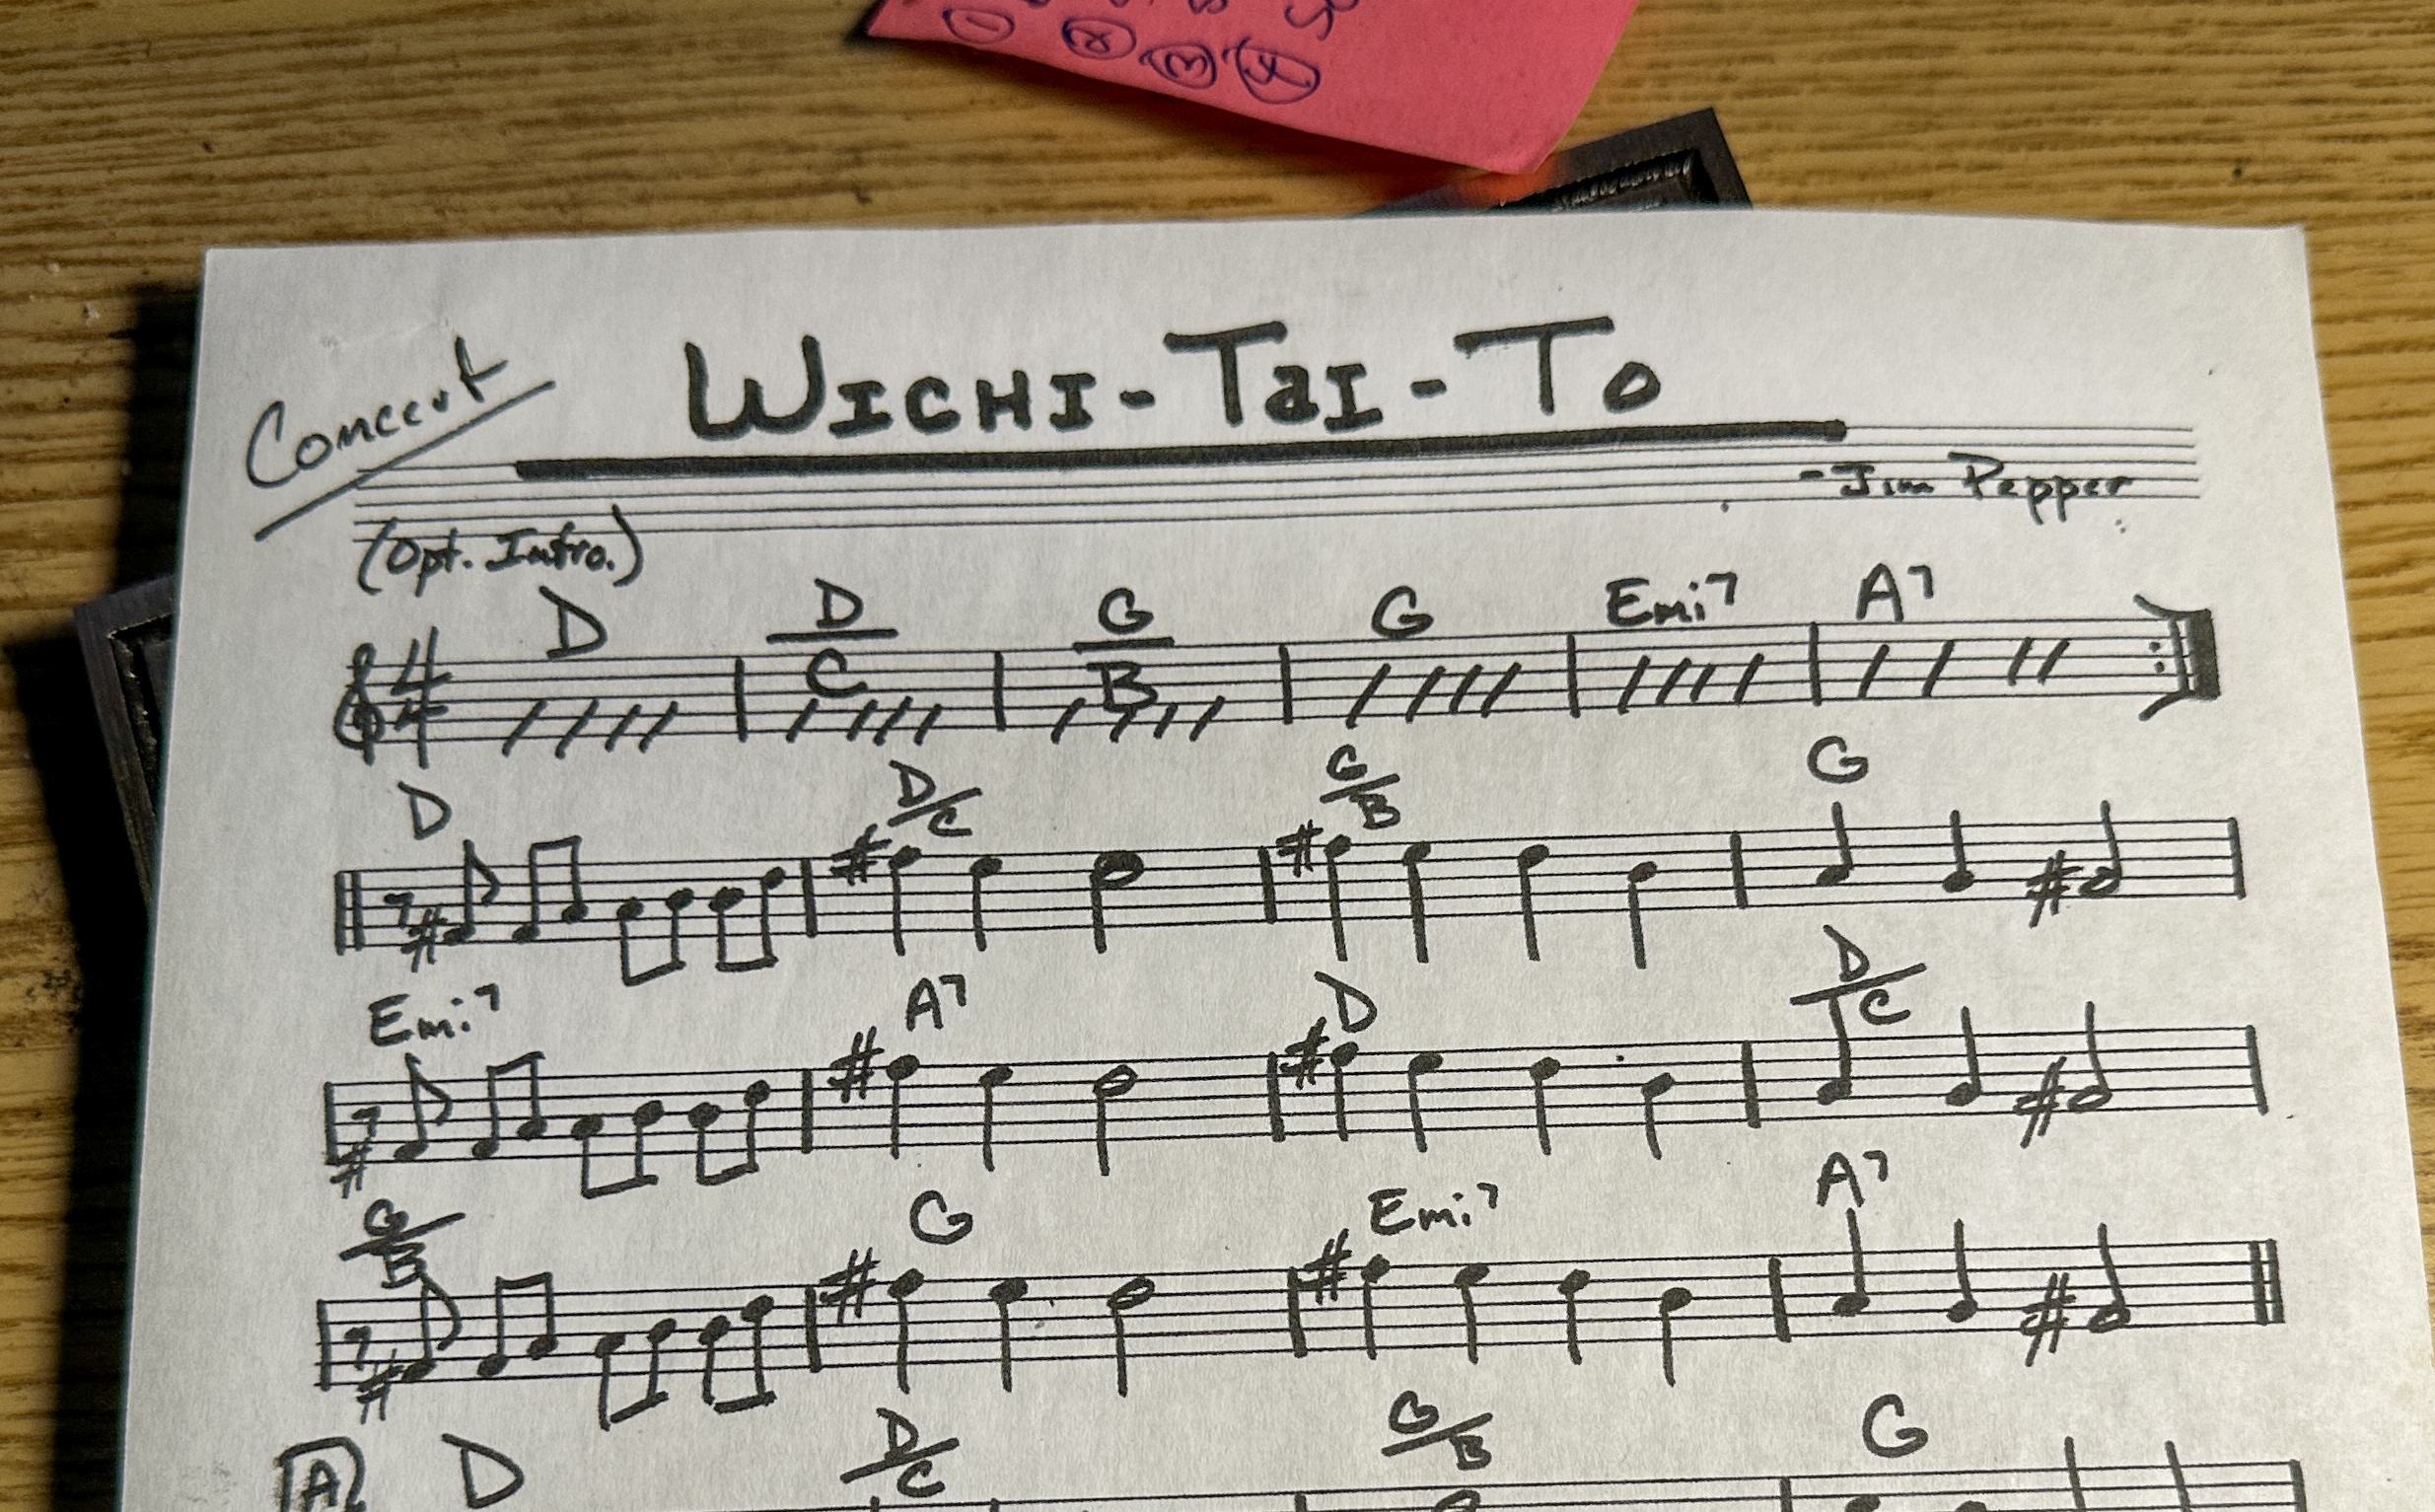 Sheet music for Jim Pepper’s song “Wichi Tai To” sits on the desk at Sean Cruz’s house.